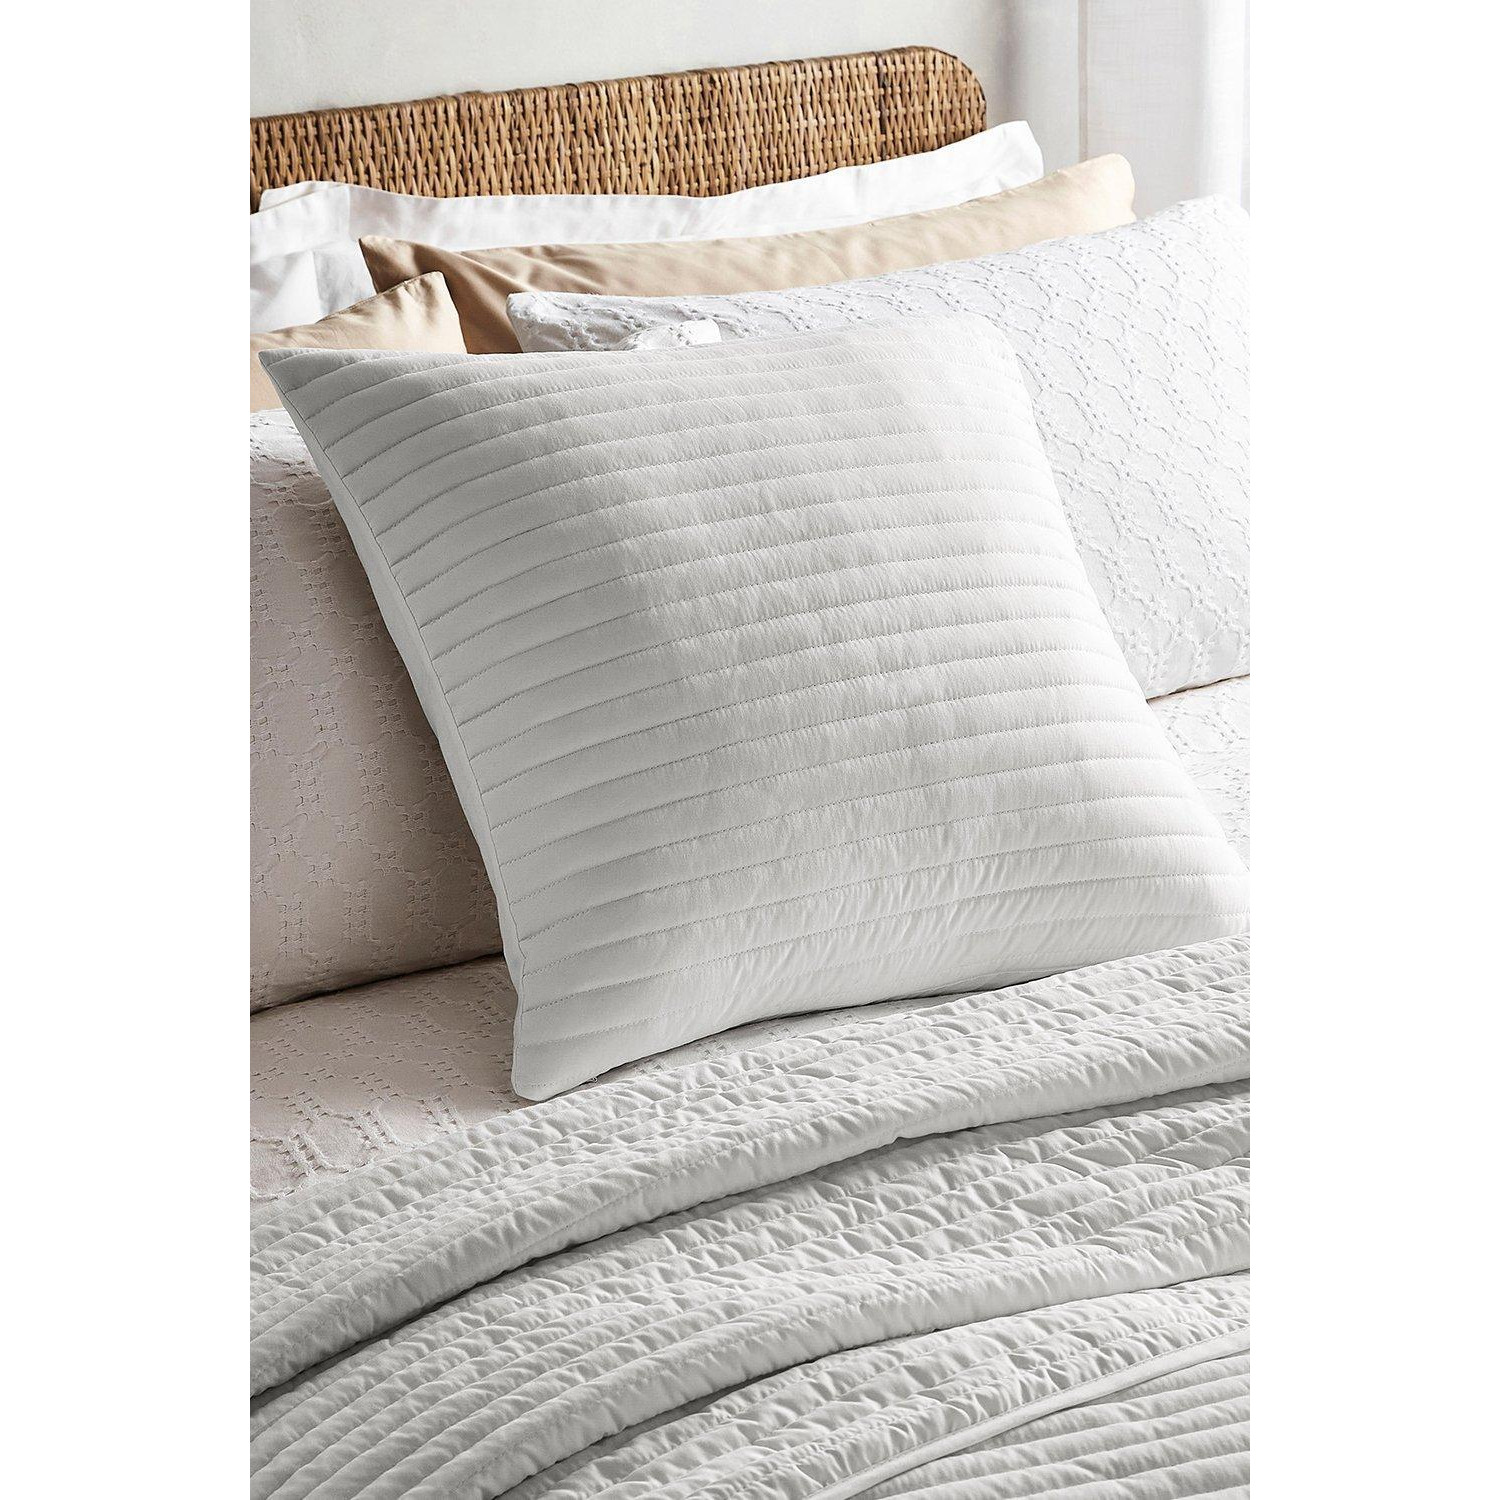 'Quilted Lines' Cushion - image 1